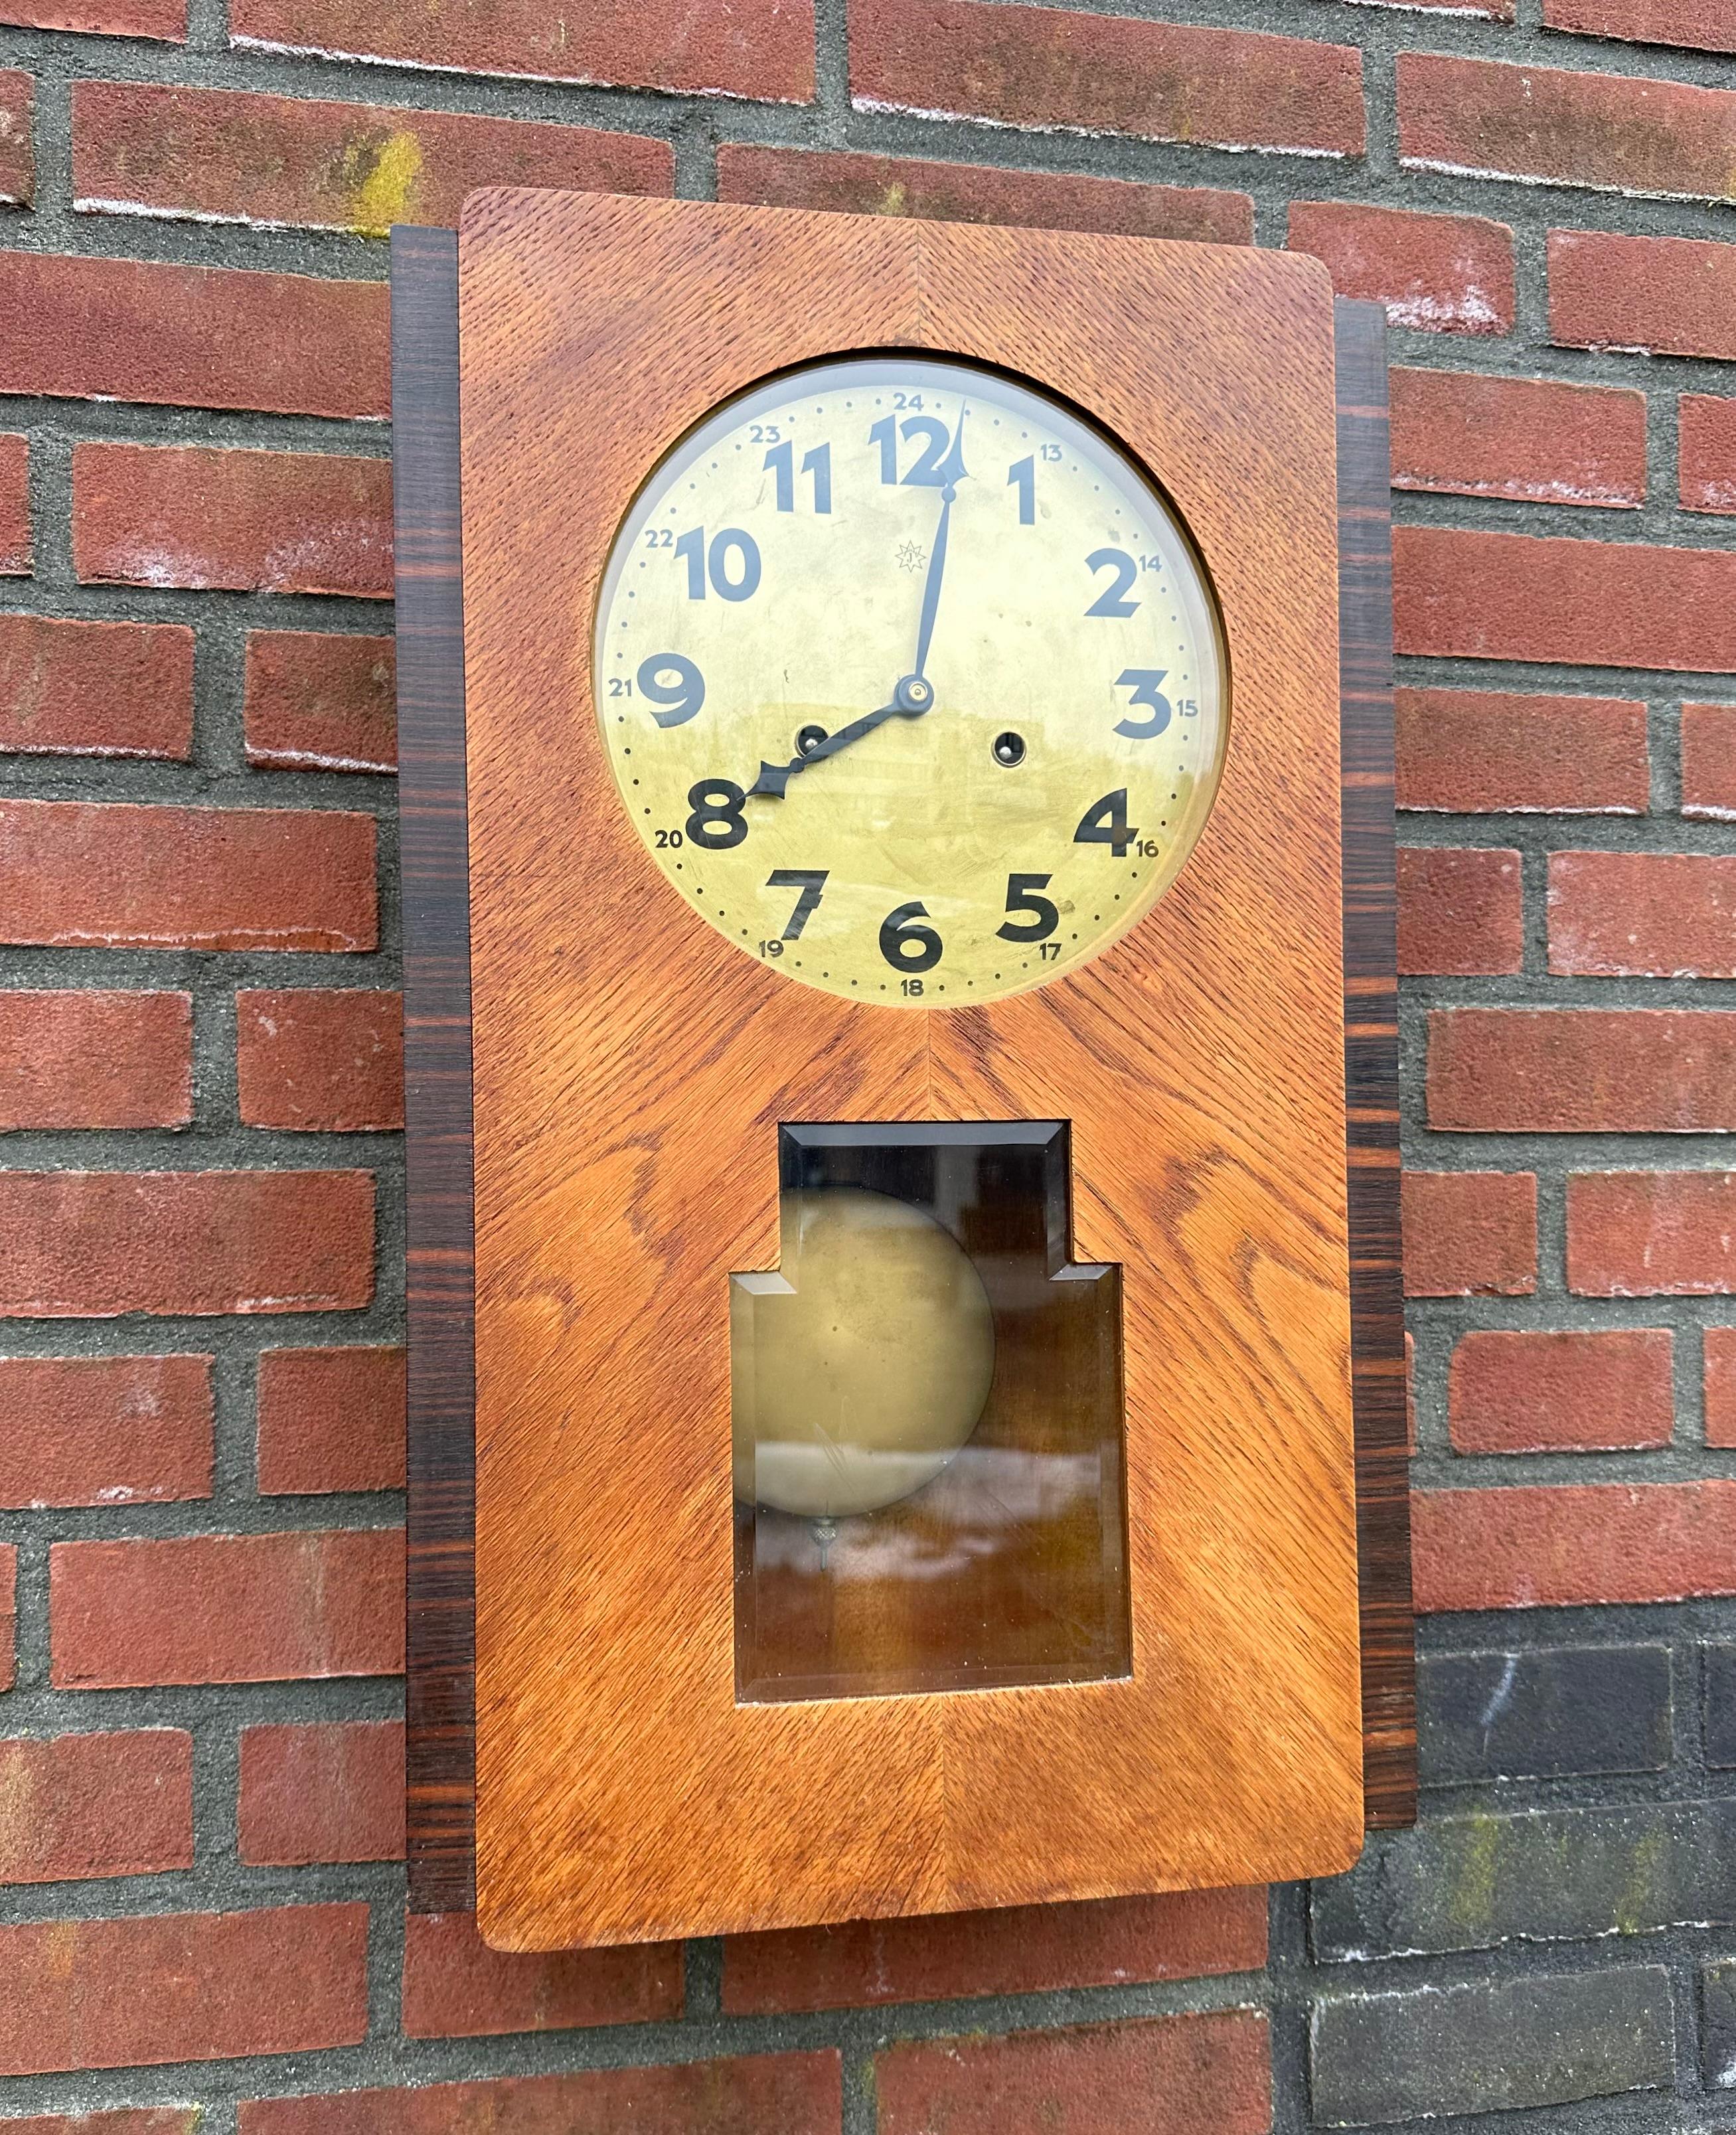 Early 20th century, great condition Dutch Arts & Crafts wall clock with original beveled and convex glass windows.

Over the years we have sold a few dozen Arts & Crafts table clocks. They were all beautiful and unique in design, but they ARE out